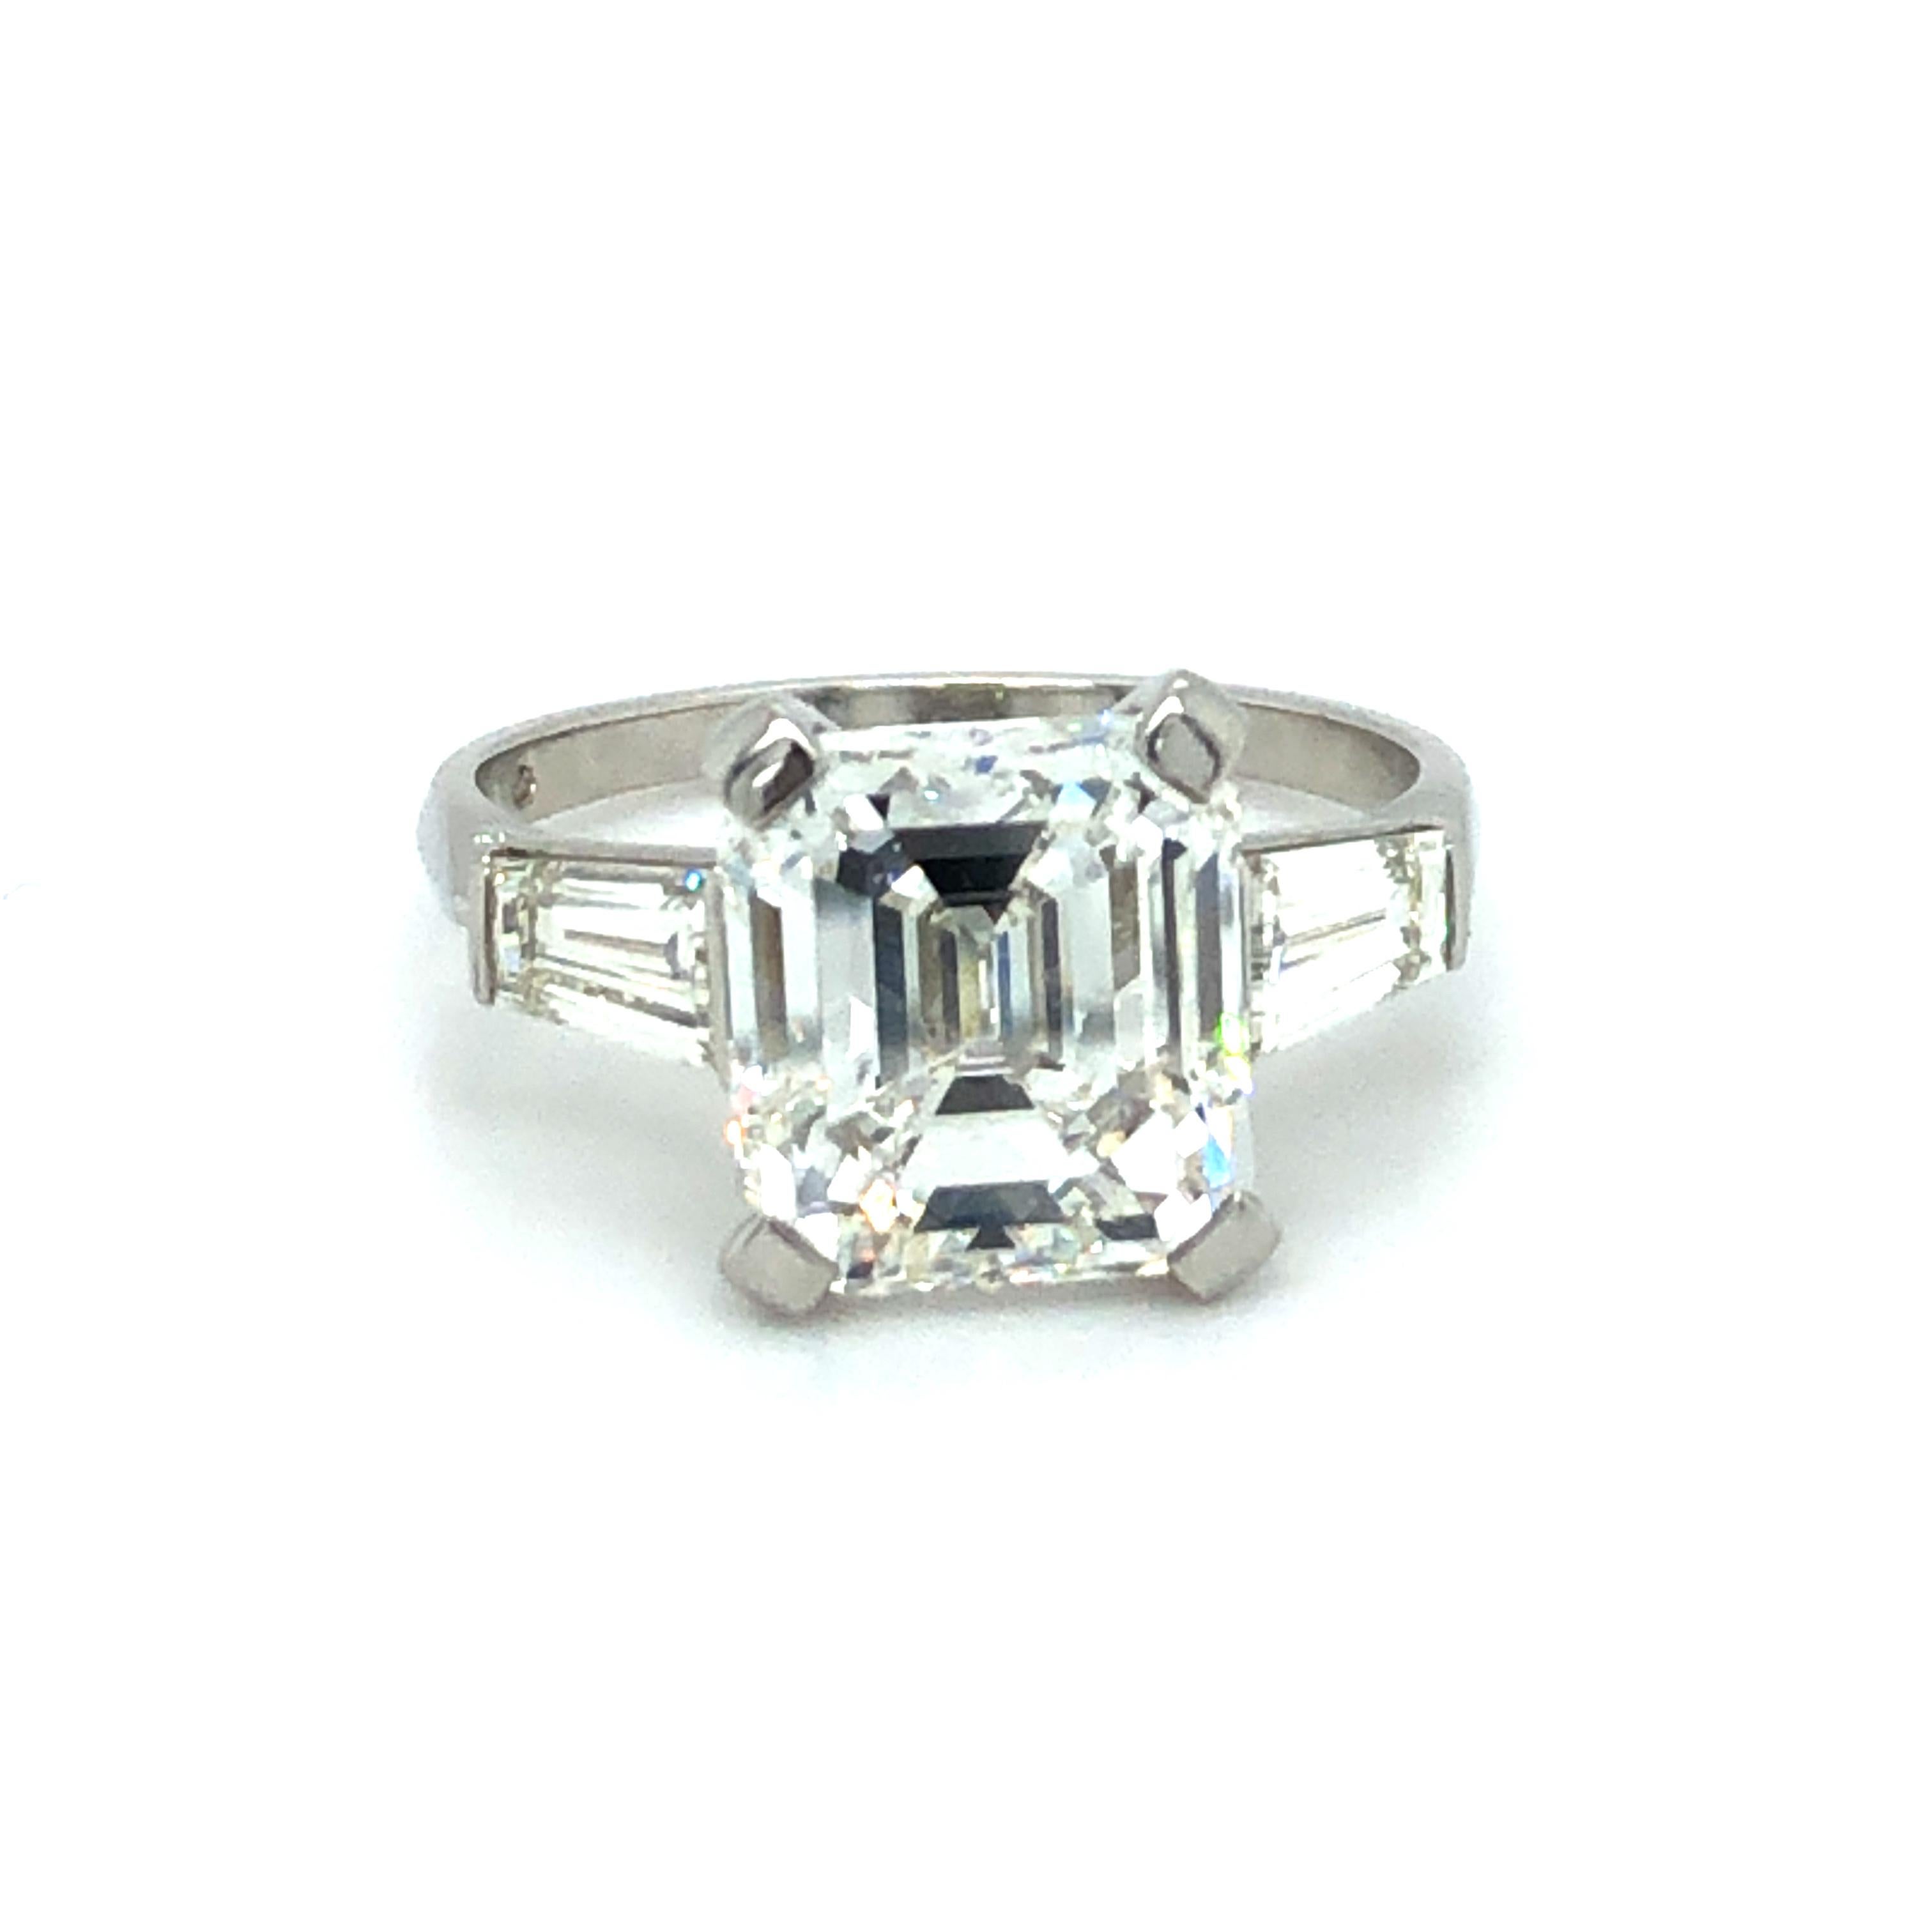 Beautiful and timeless solitaire diamond ring in platinum 950 by Swiss jeweller Gübelin.
Set with a 4.19 carat emerald-cut diamond of H colour and vs1 clarity. Flanked by two trapezoid shaped diamonds of G/H colour and vs clarity, total weight